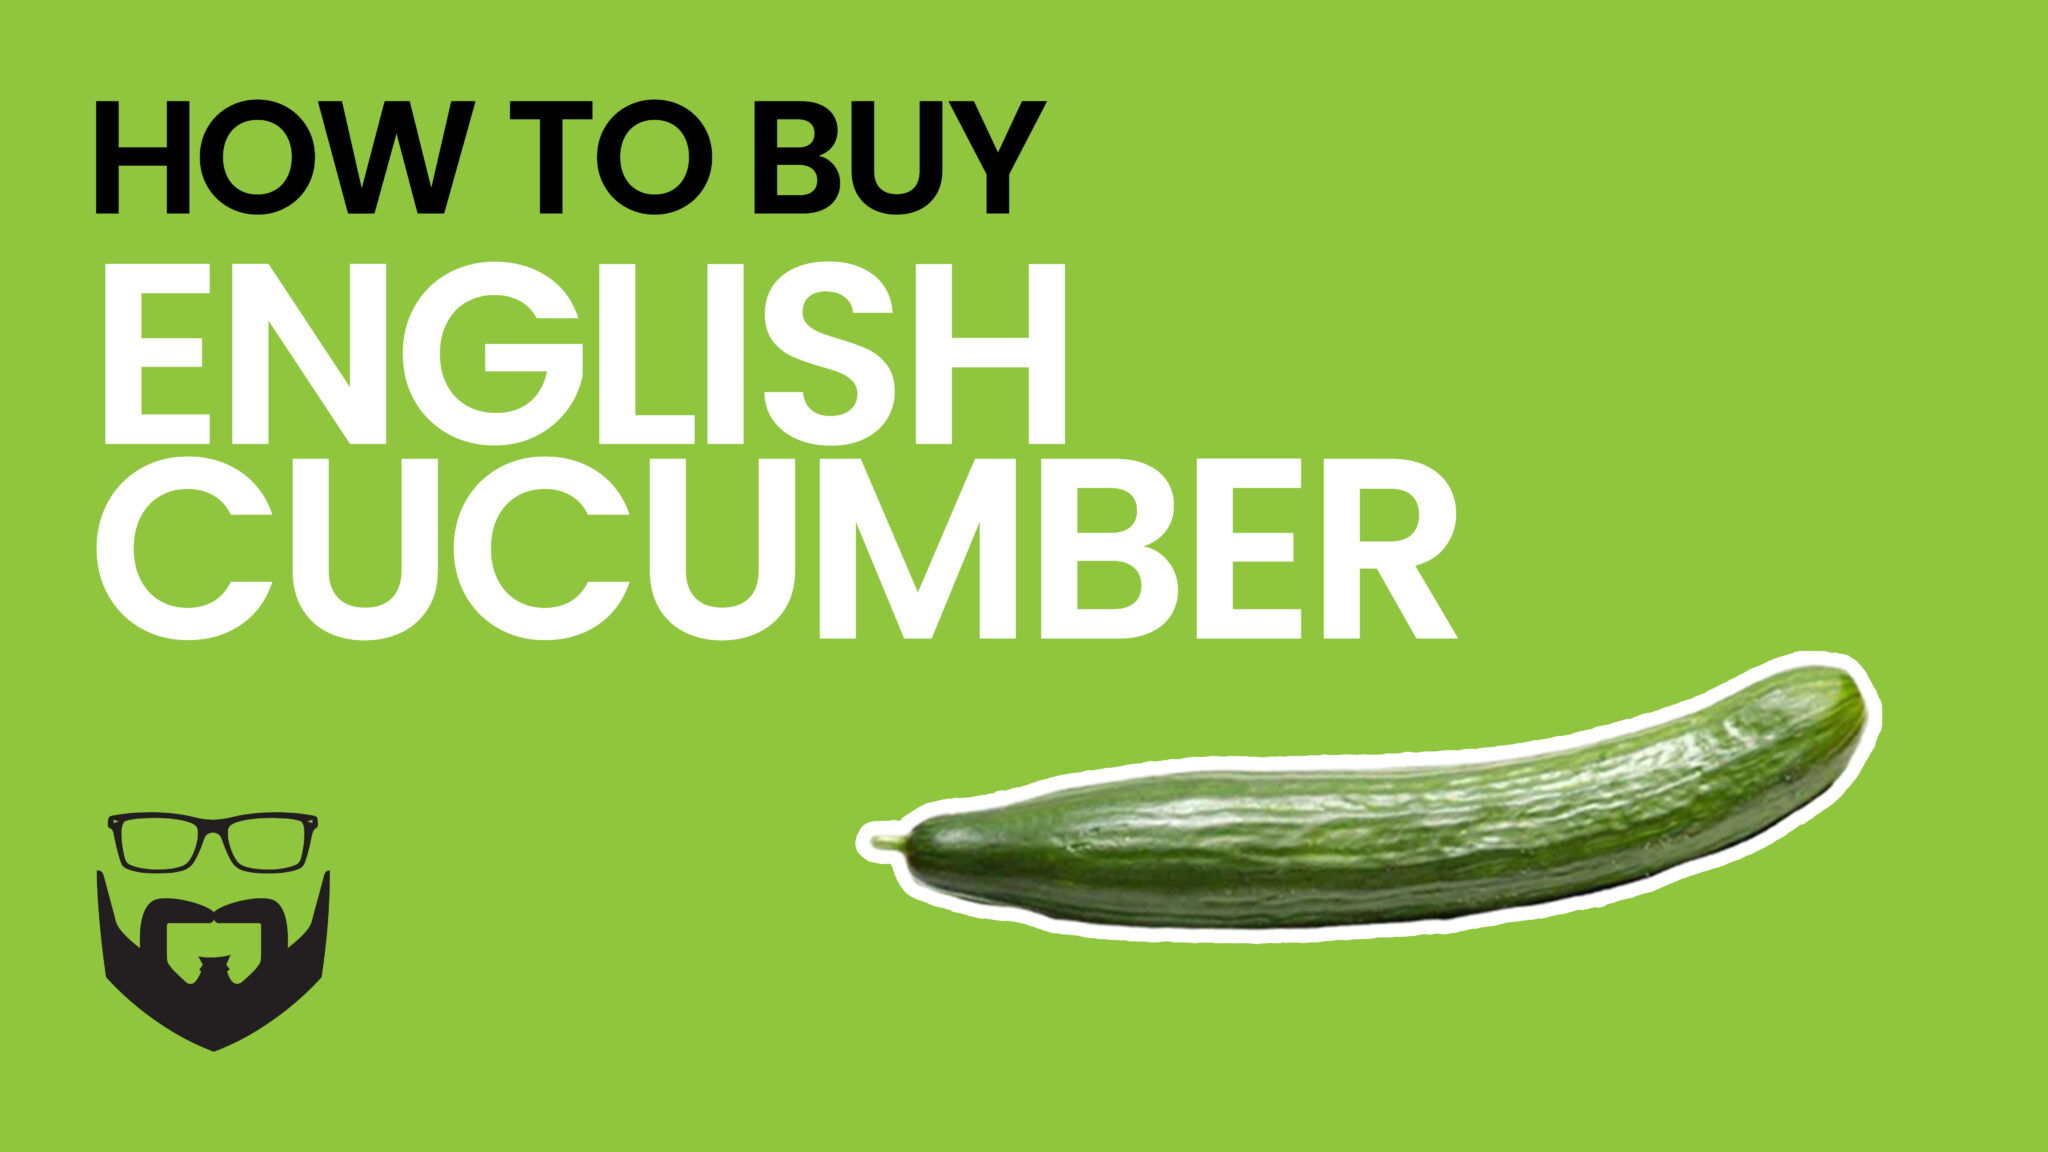 How to Buy English Cucumbers Video - Green